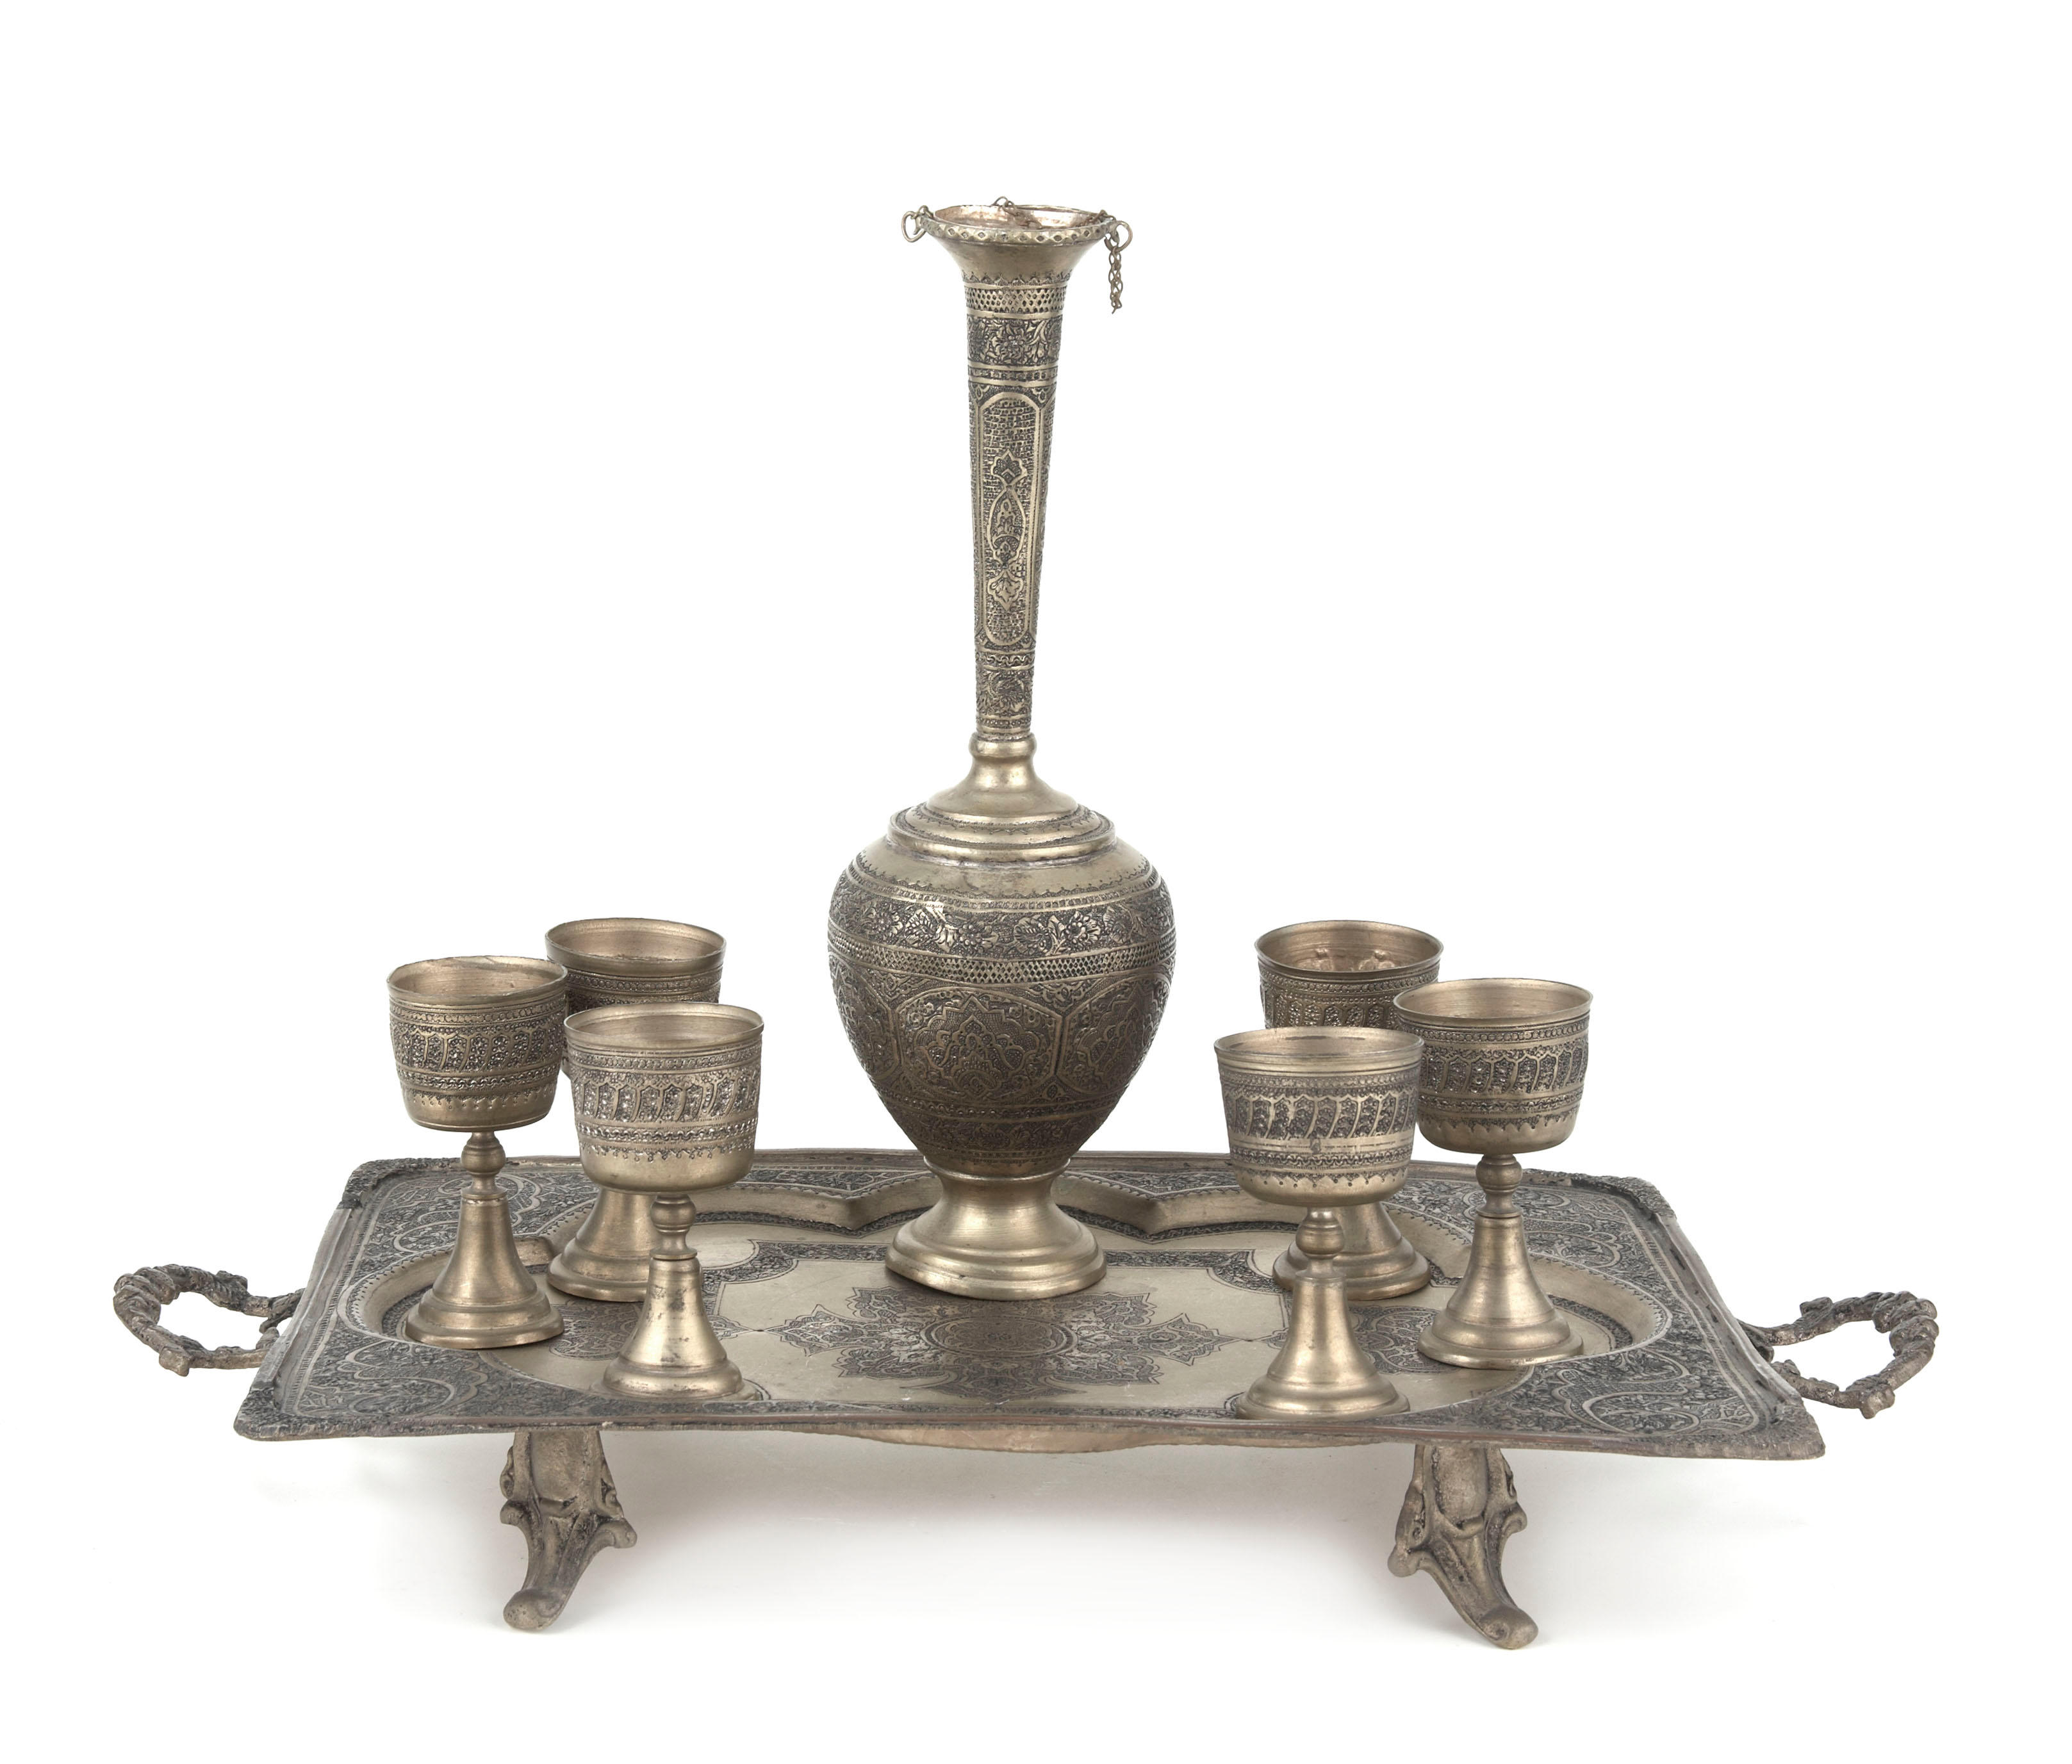 A Continental hammered brass cordial set